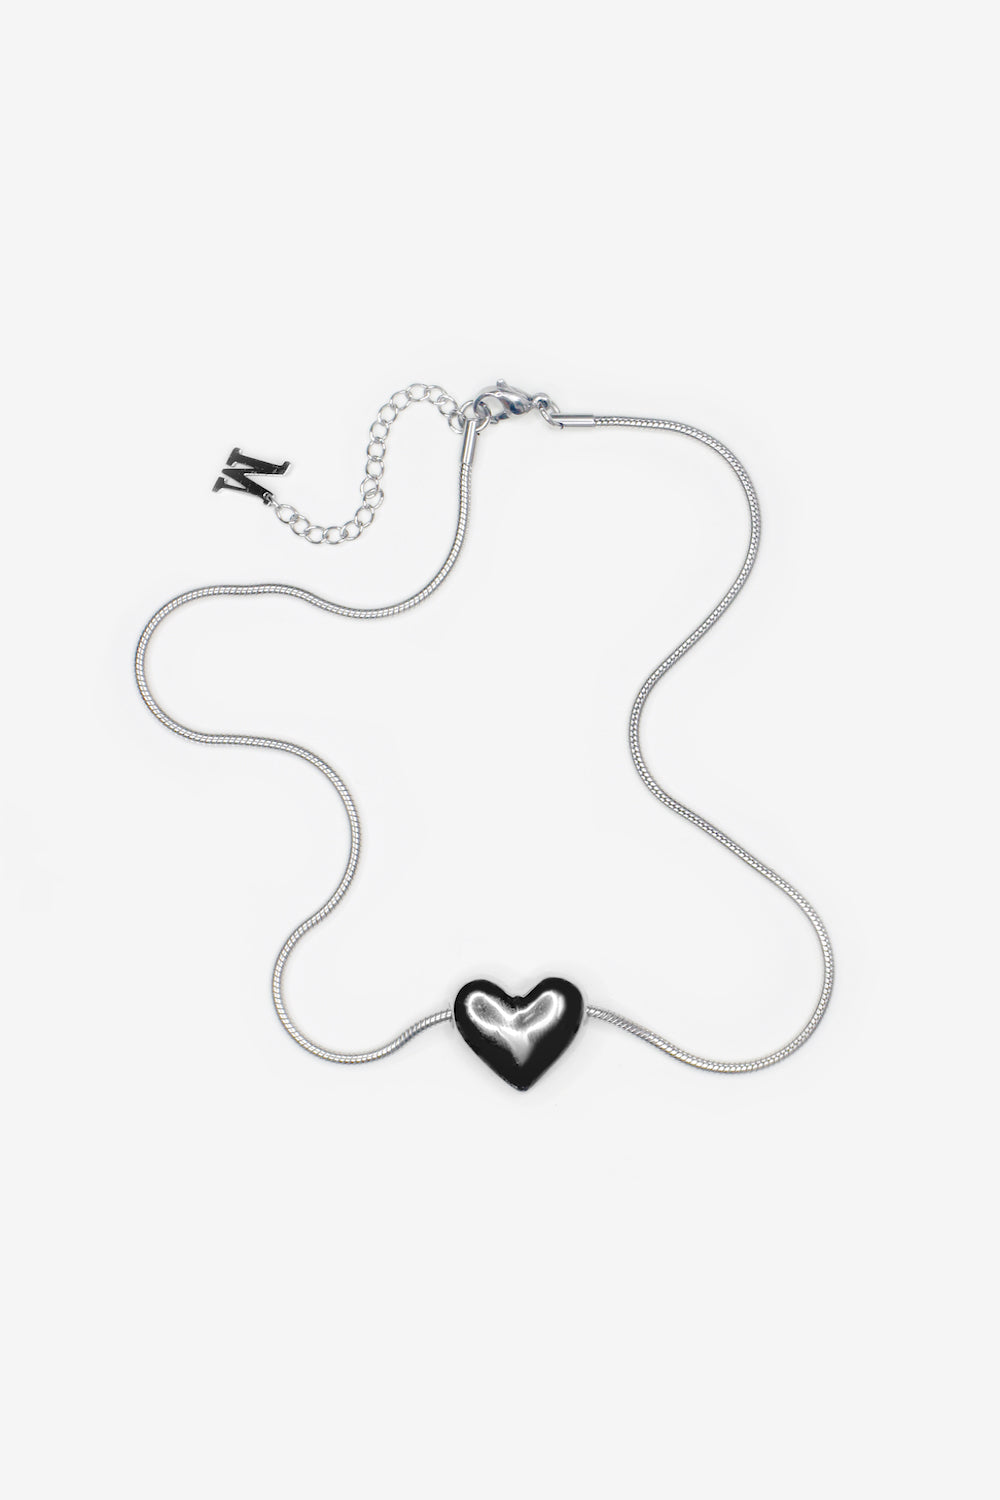 LONELY HEARTS NECKLACE | Necklace NZ | MARLAND BACKUS NZ | Black Box Boutique Auckland | Womens Fashion NZ